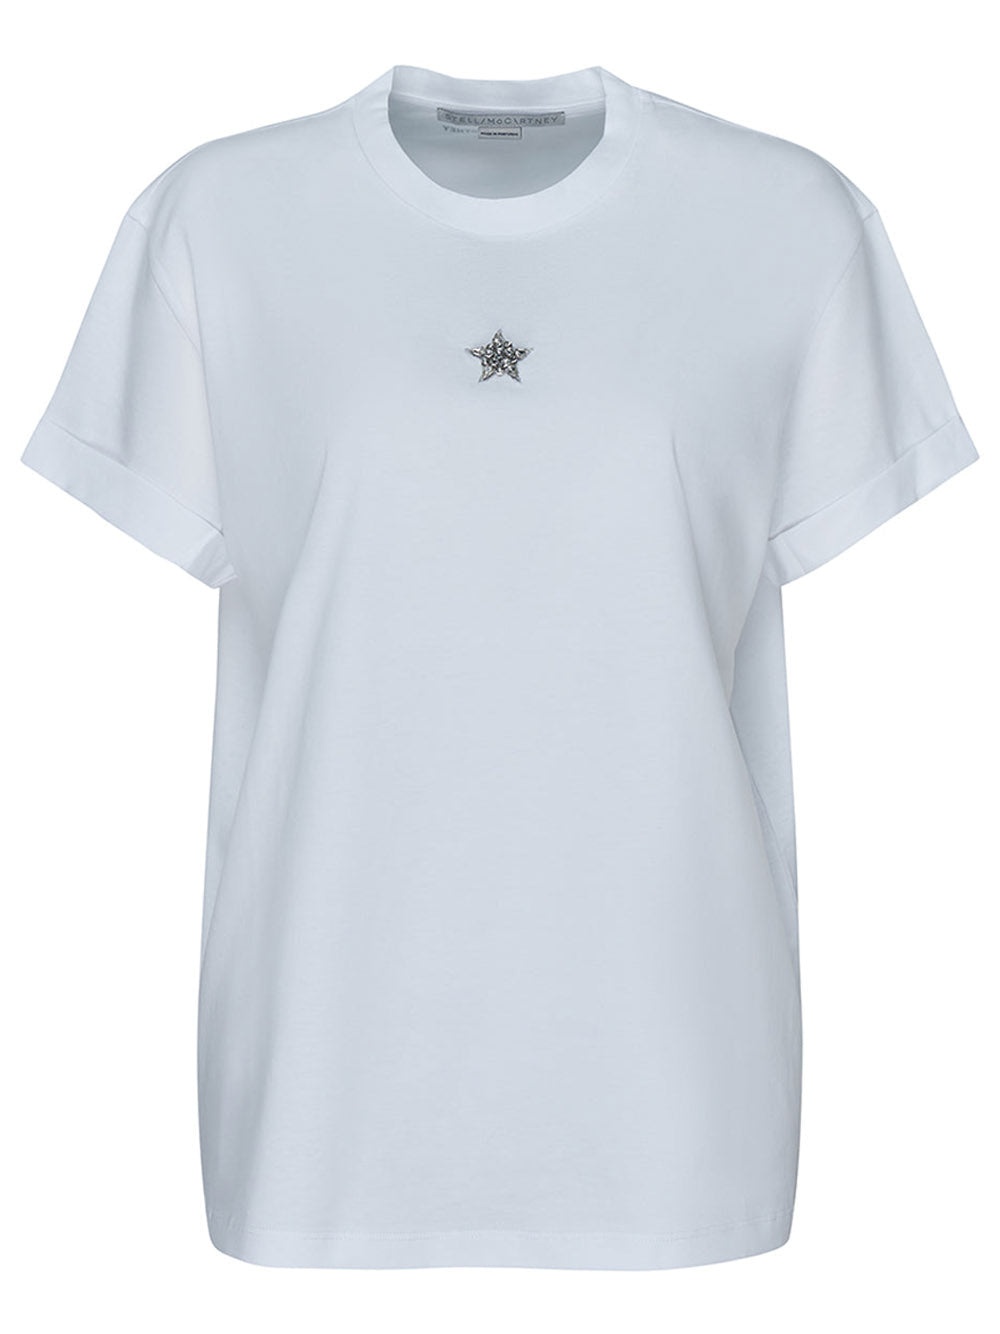 Crystal Mini Star Embroidery T-Shirt - 1